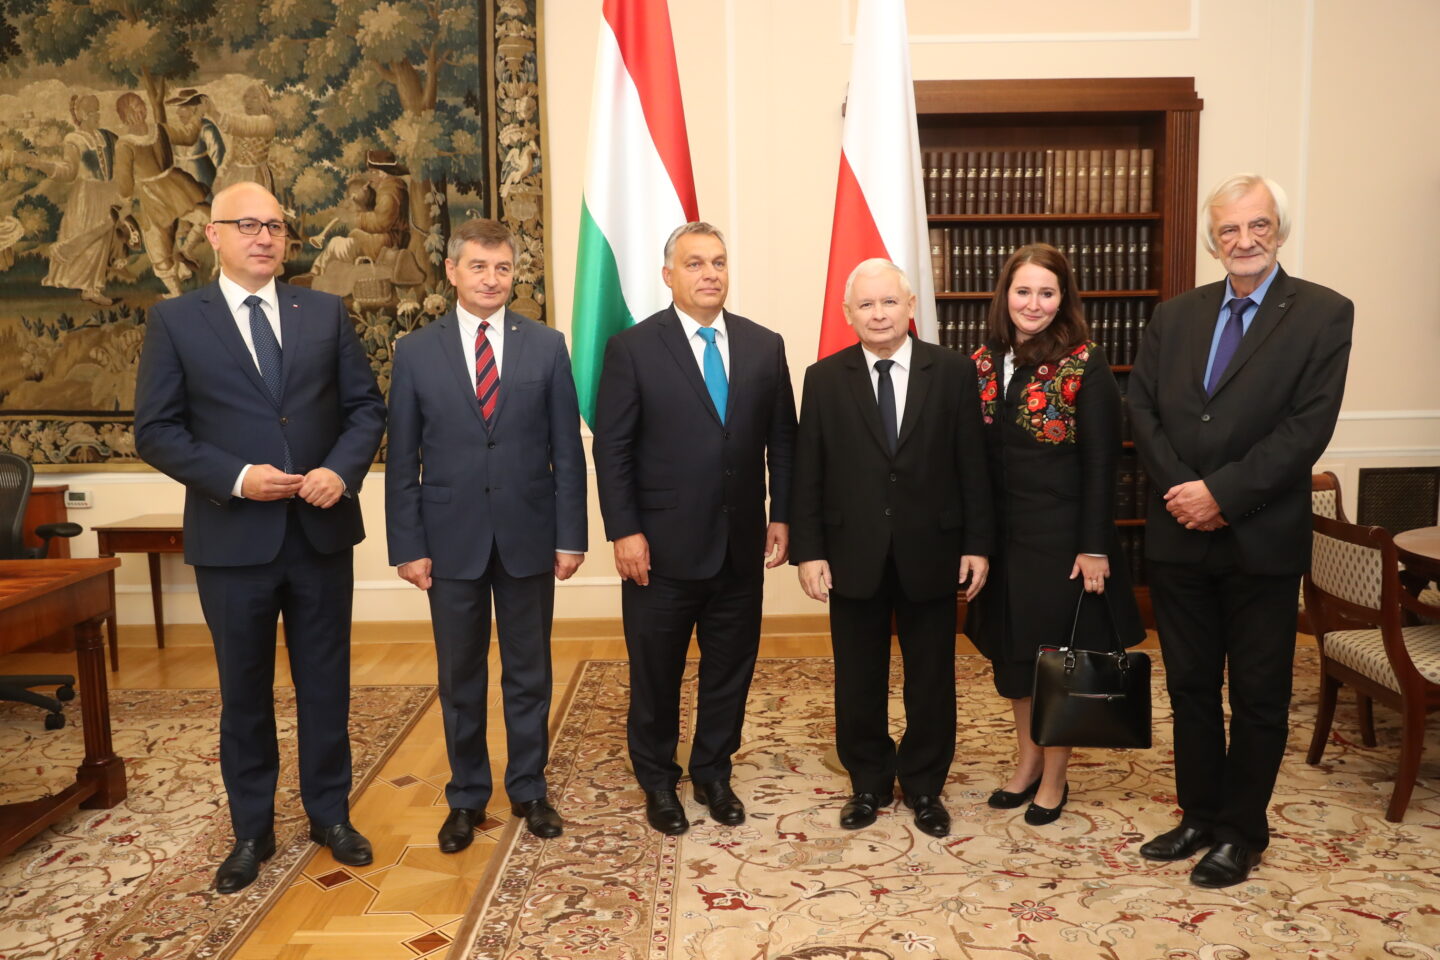 The end of the Polish-Hungarian friendship. Golden times for the alliance between Poland, the Czech Republic and Slovakia are coming 